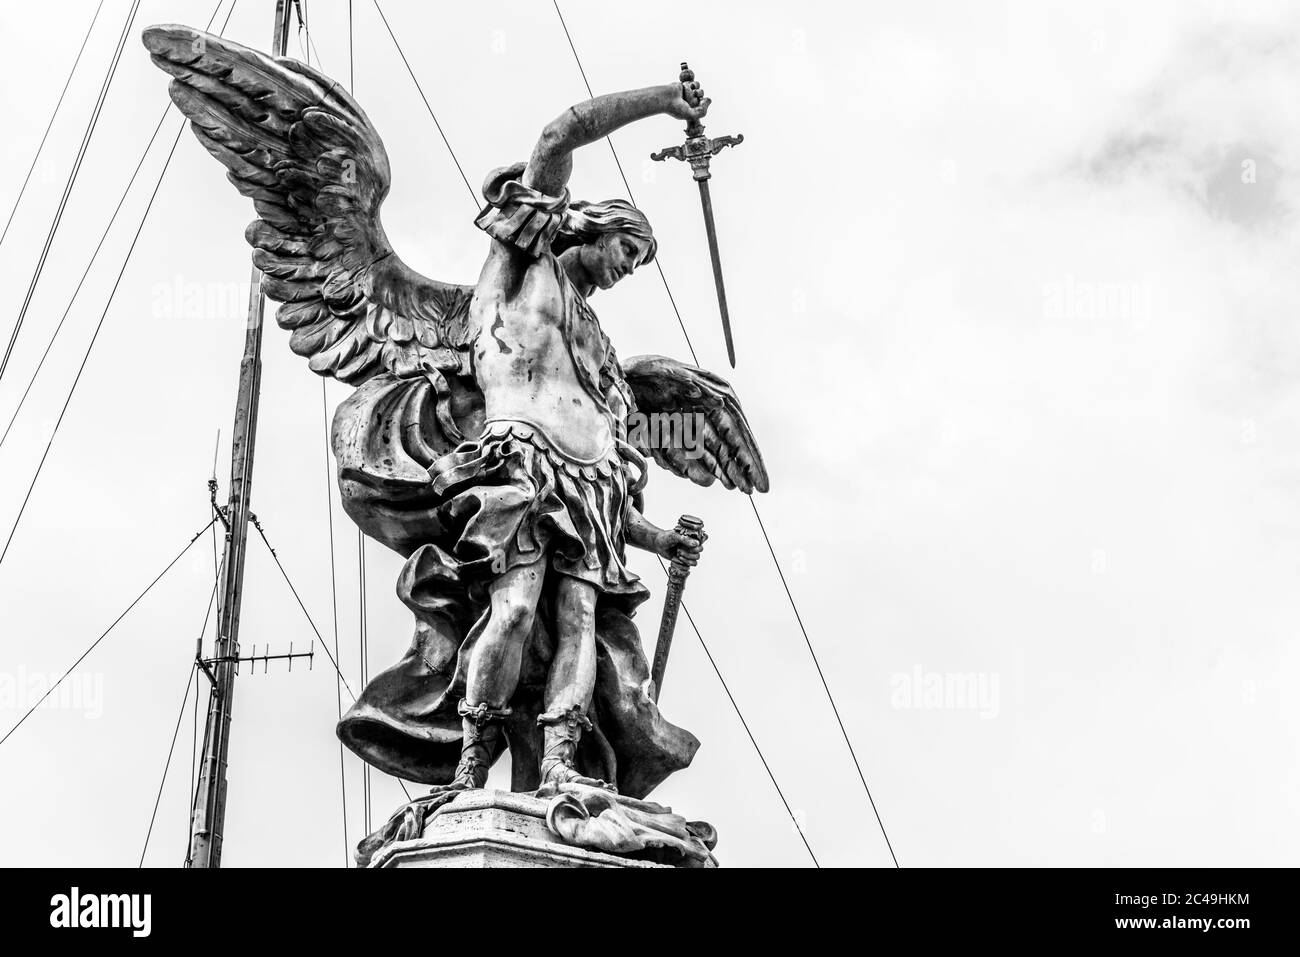 Bronze statue of Michael the Archangel on the top of the Castel Sant'Angelo, Rome, Italy. Black and white image. Stock Photo